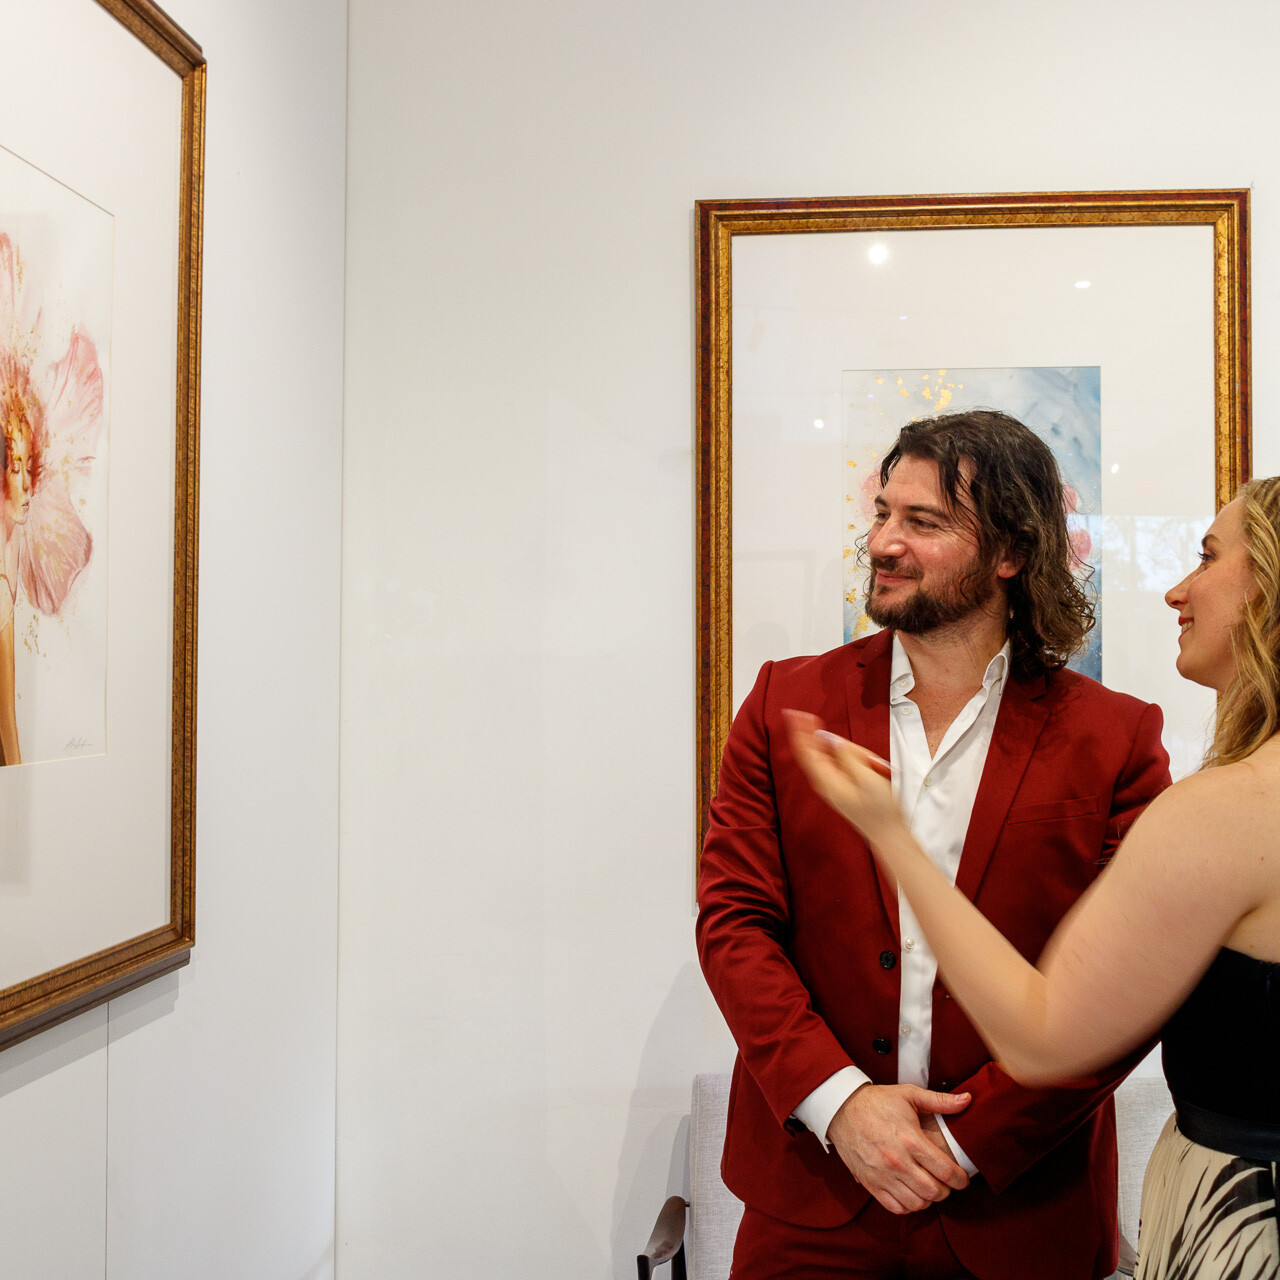 Artist Alex Righetto in a red suit discussing his 'Angelic Cherubic' painting from the Radiance Collection with a female art collector in a gallery.